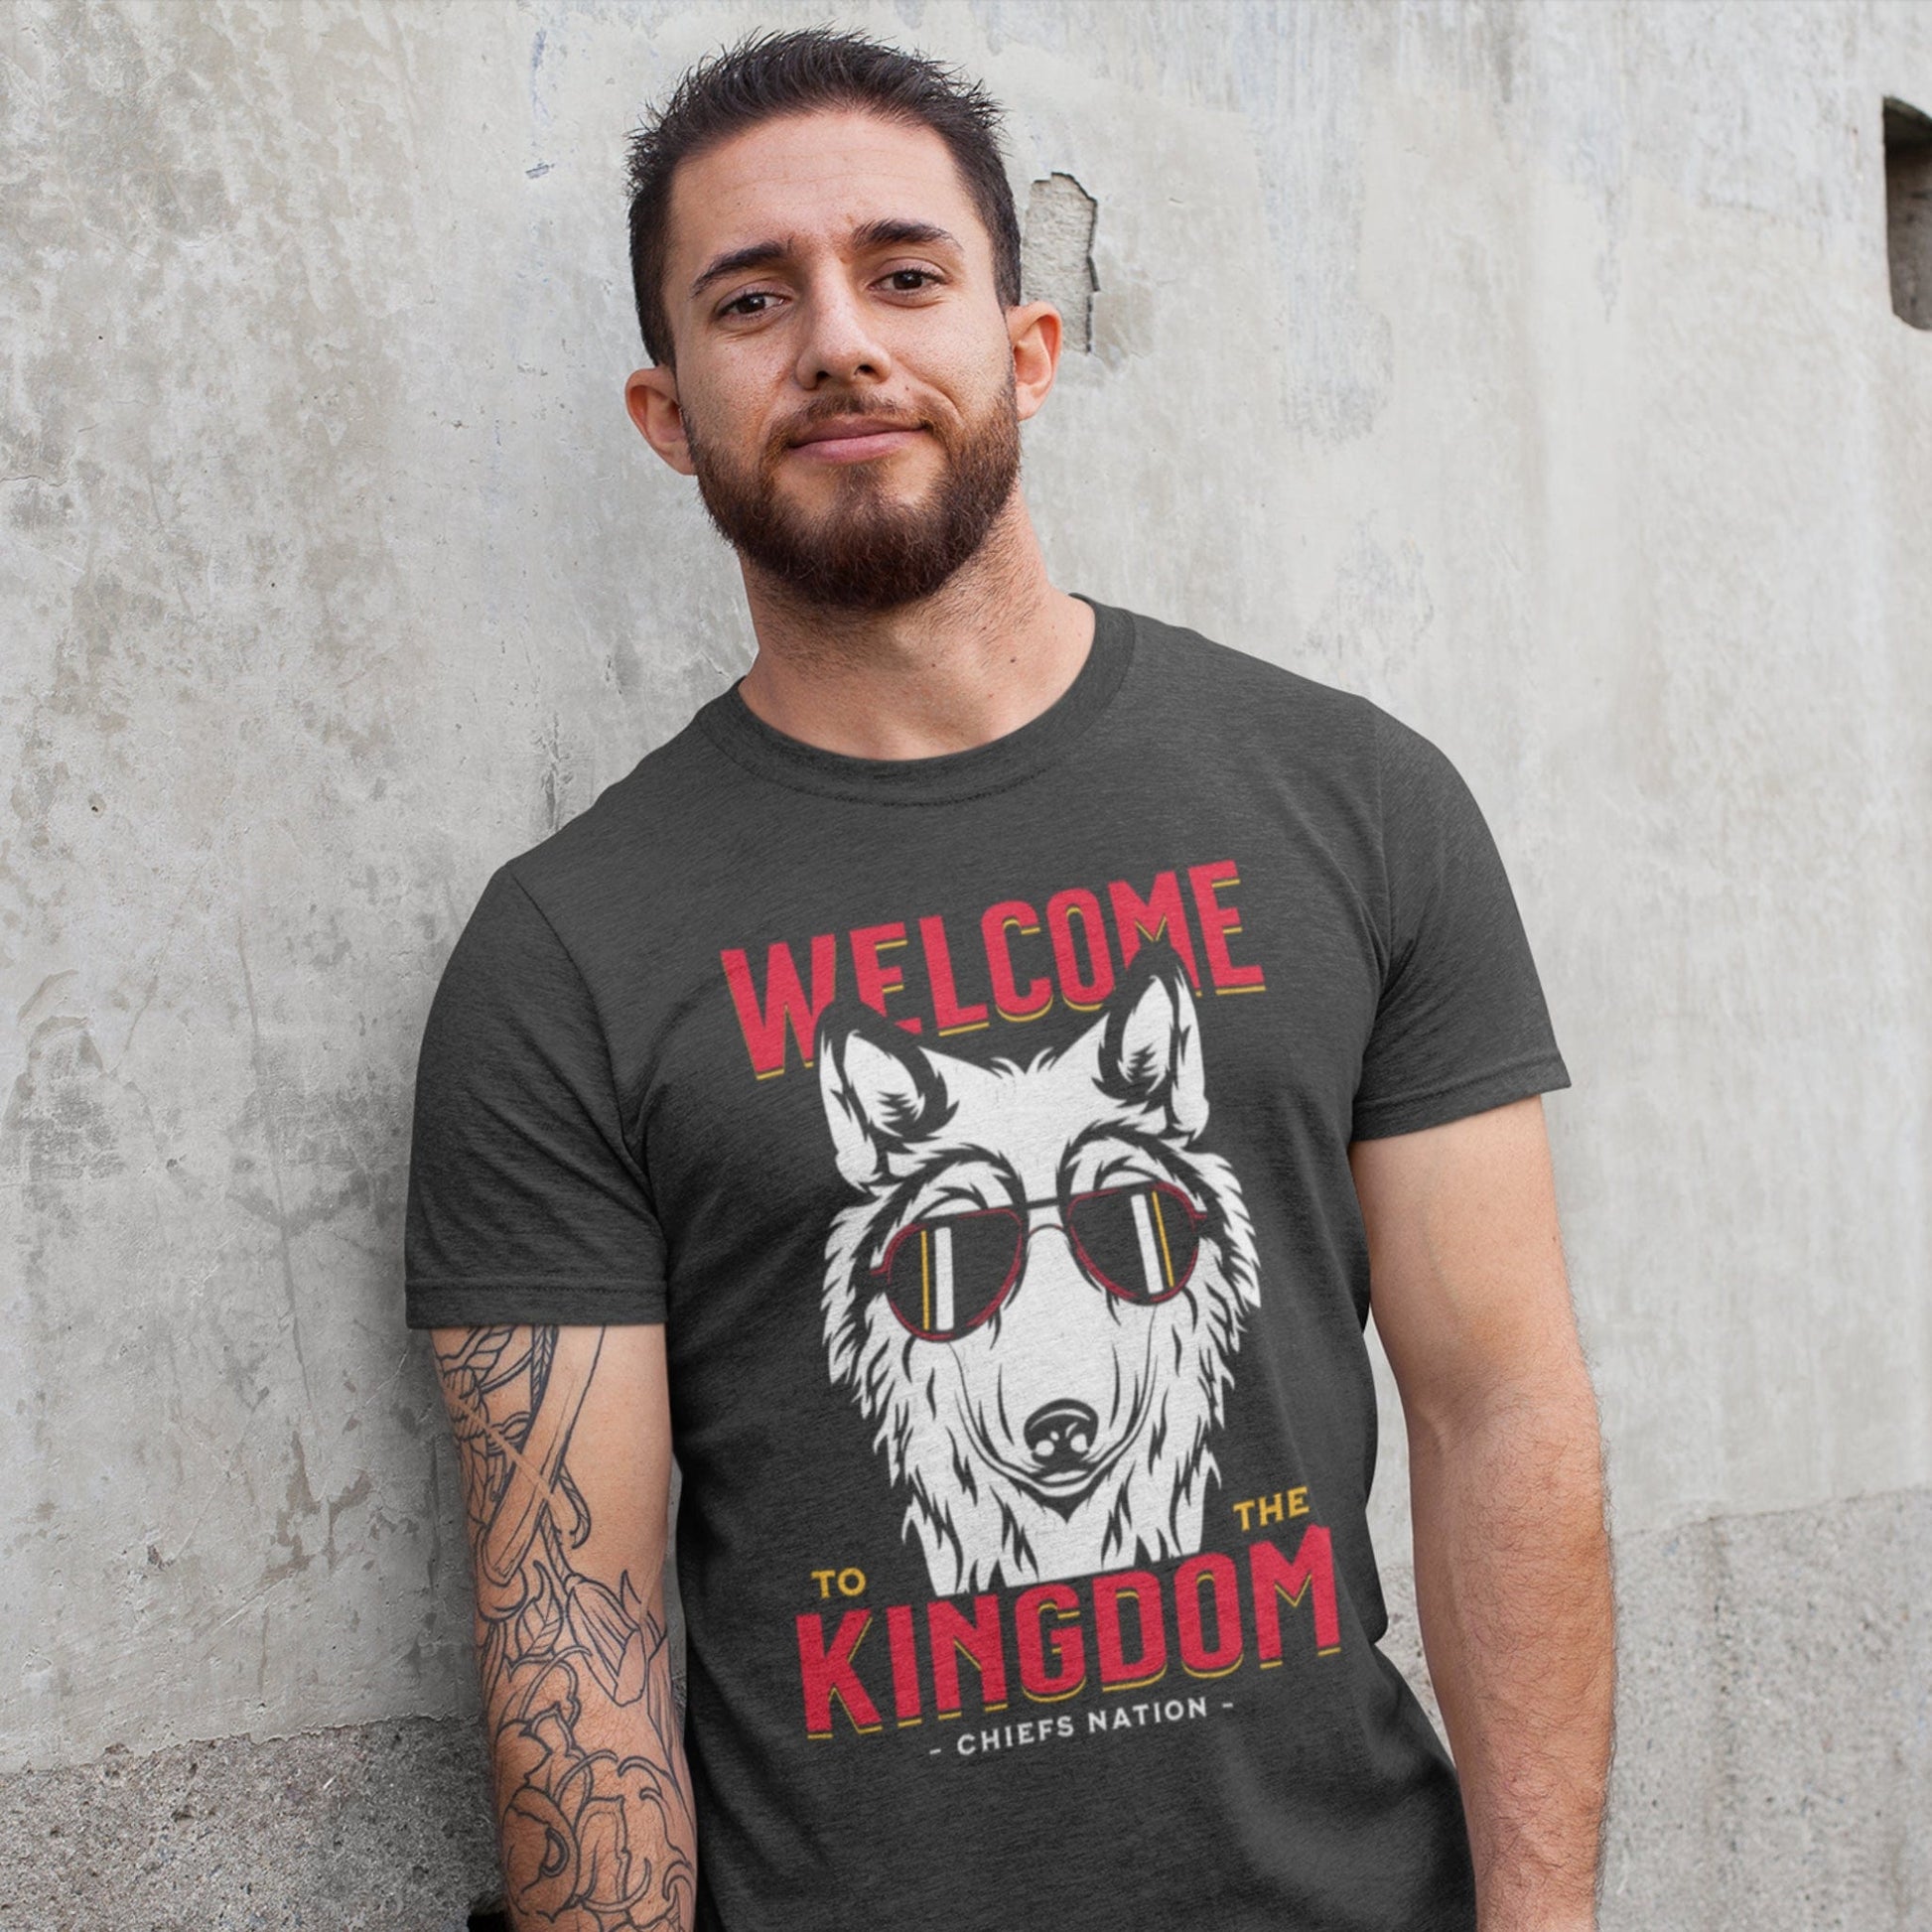 KC Swag Kansas City Chiefs COOL WOLF KINGDOM with wolf face graphic on dark heather grey t-shirt worn by bearded male model against concrete wall